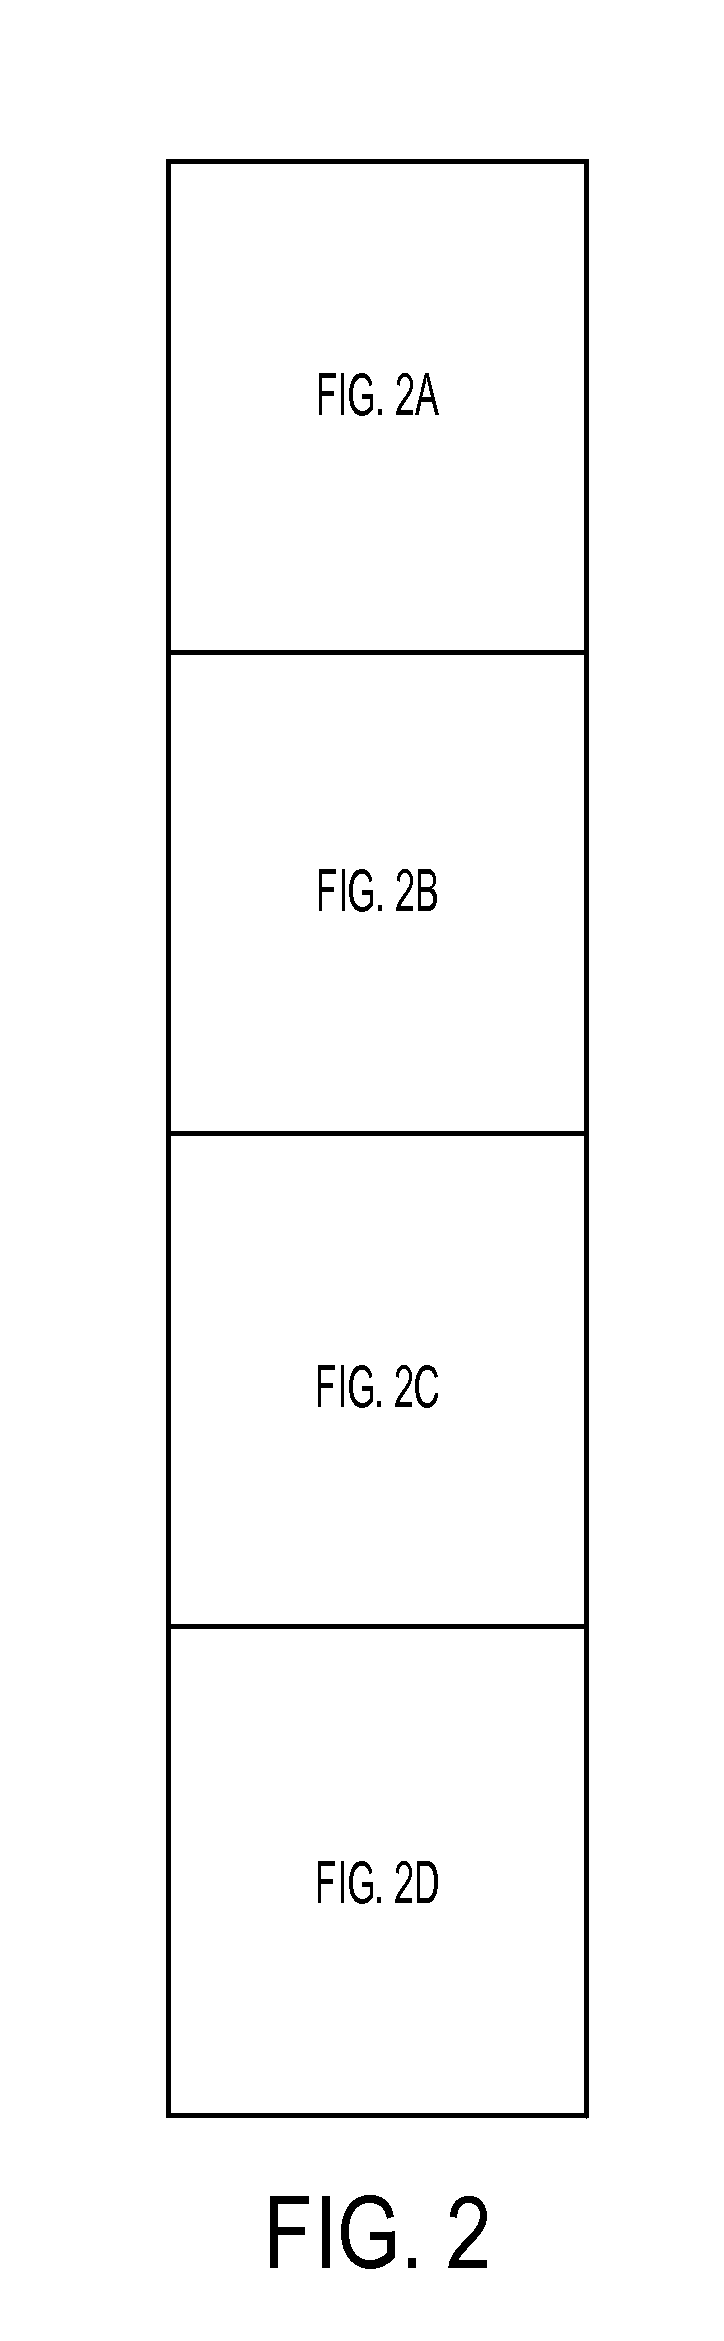 Method and user interface for forensic video search